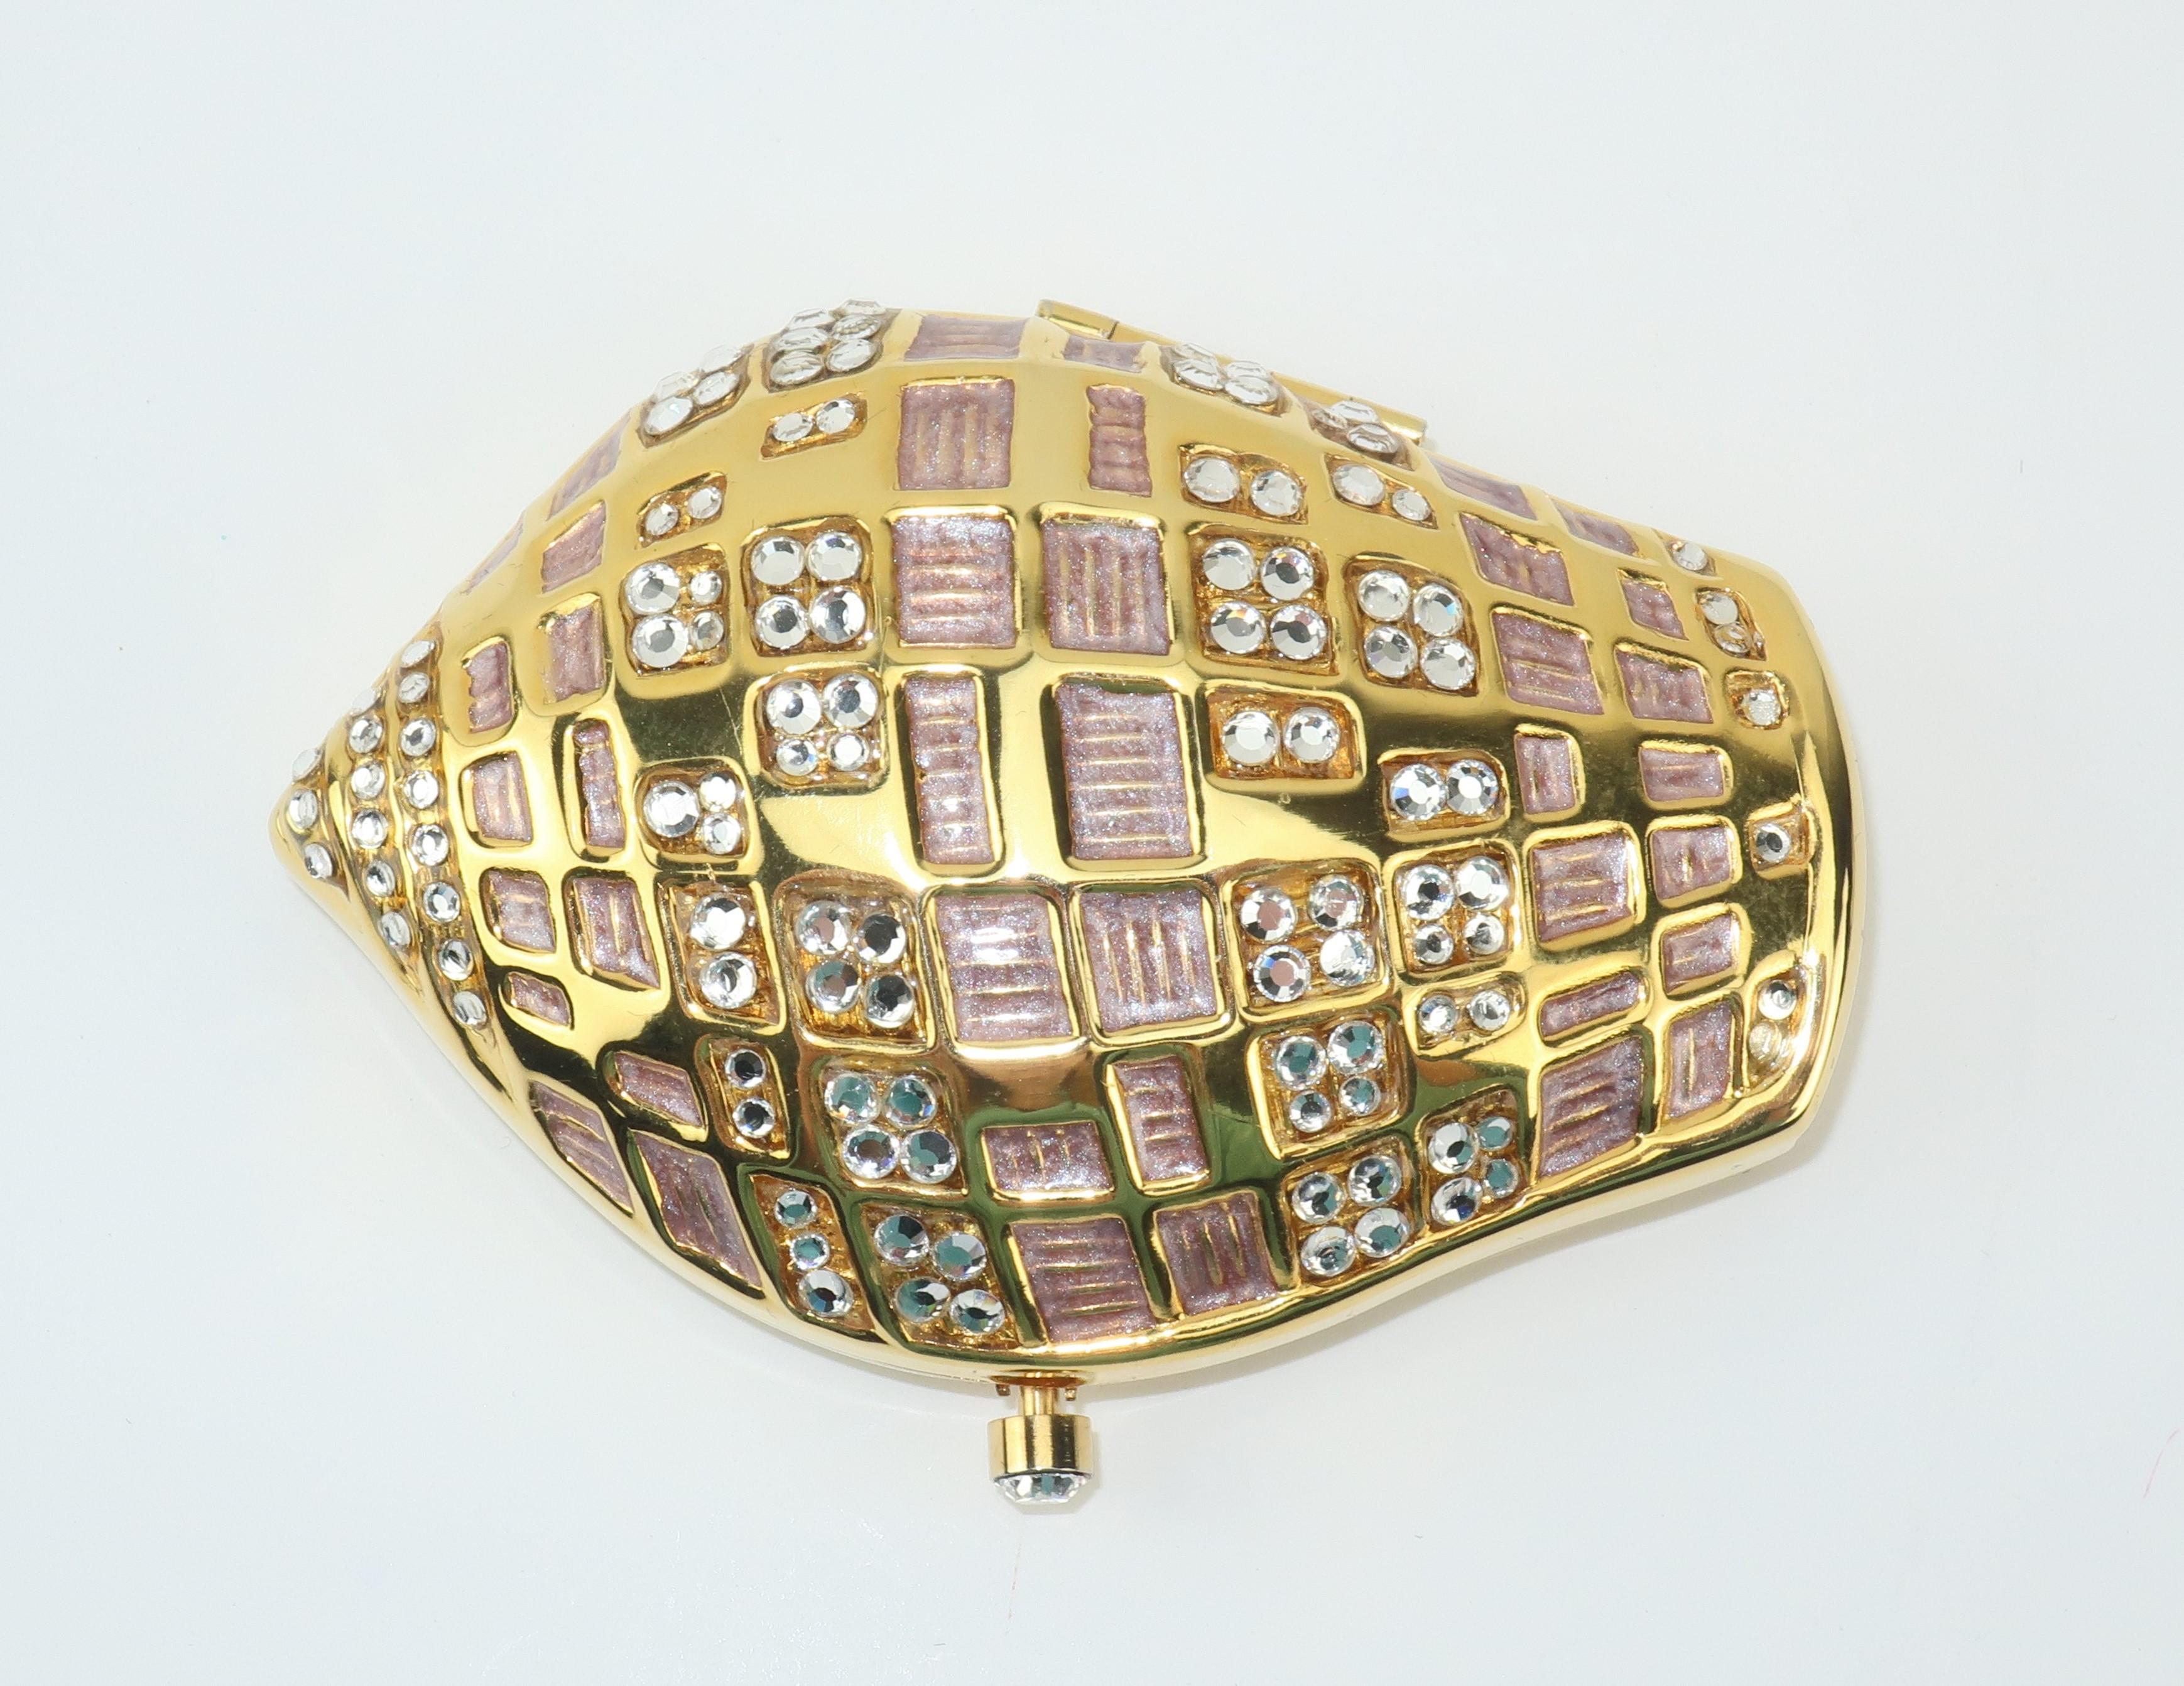 A collectible powder compact from Estee Lauder in the form of a shell with crystal rhinestone embellishments and sparkling pink enamel decoration.  The crystal rhinestone push button closure opens to reveal a mirror and a refillable pressed powder